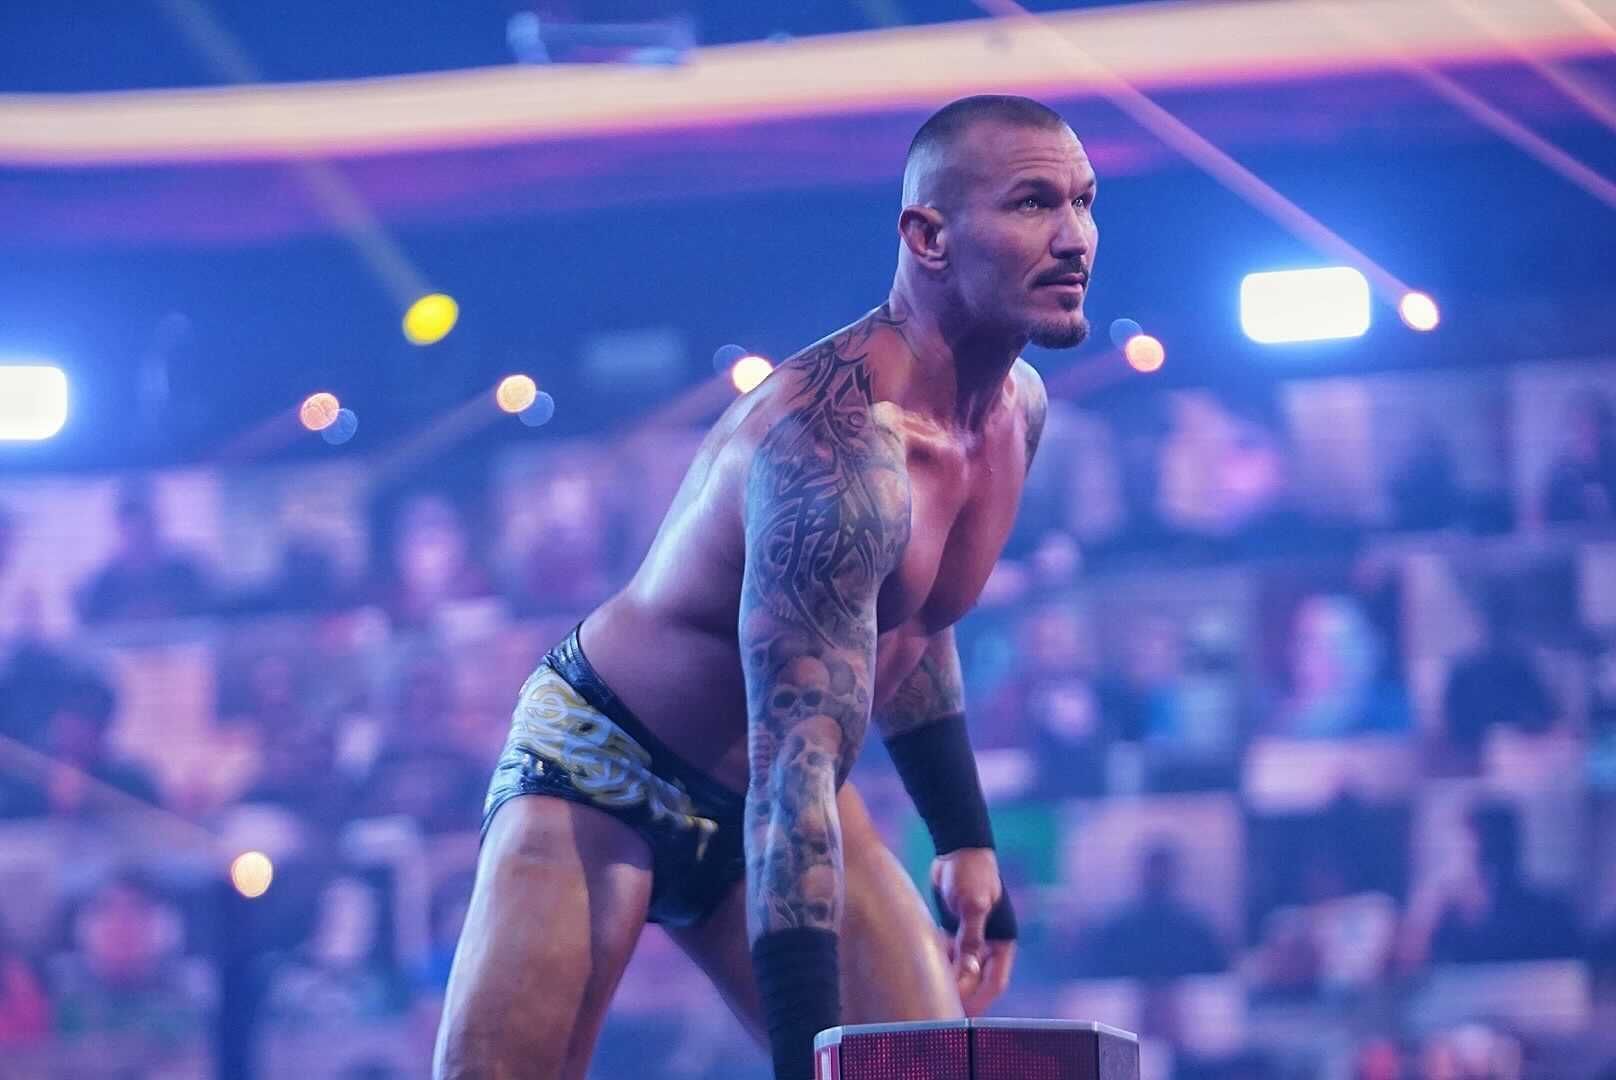 Randy Orton has done a lot in his illustrious career.